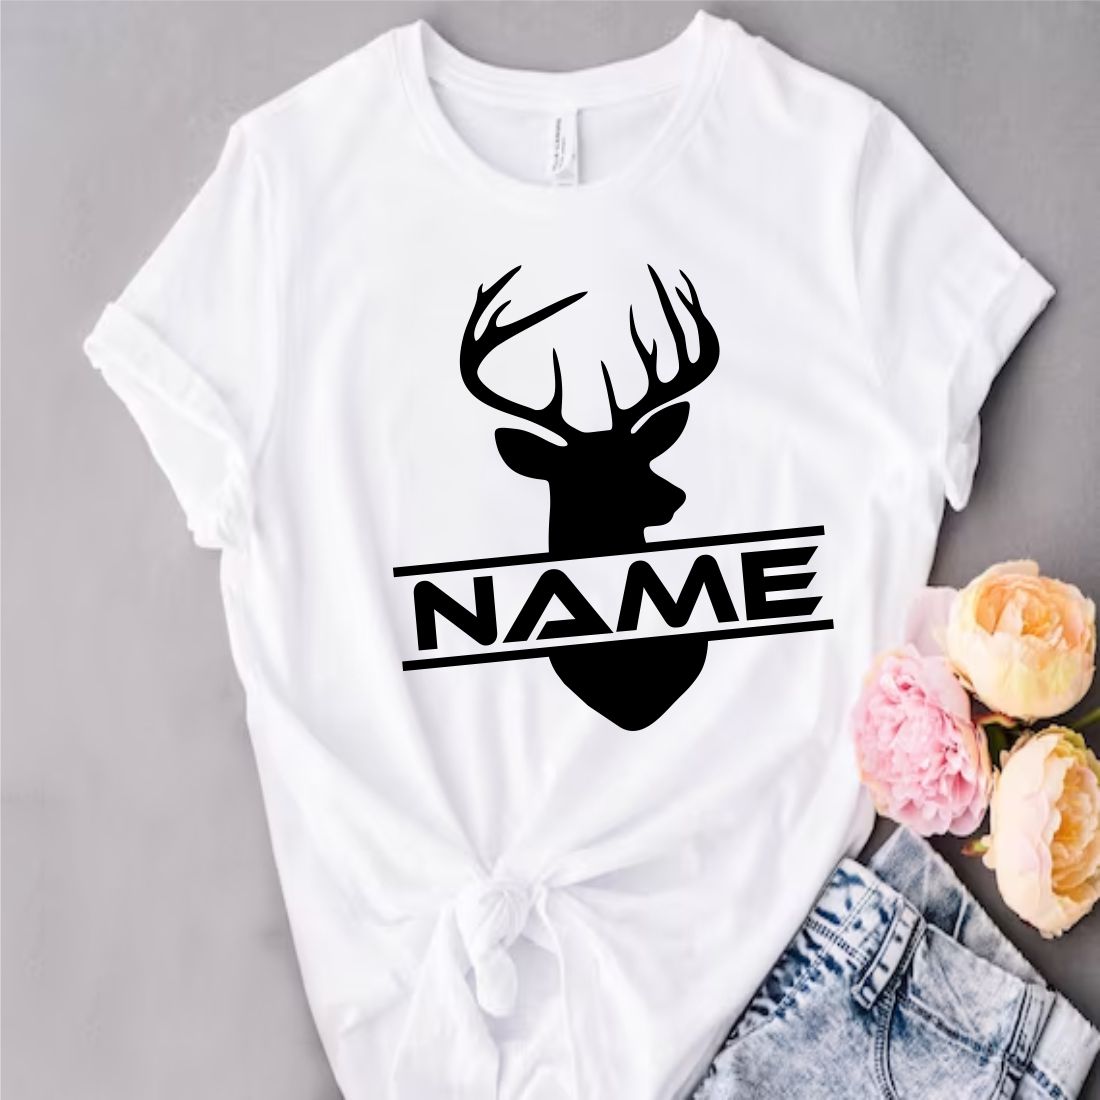 T - shirt with a deer head and name on it.